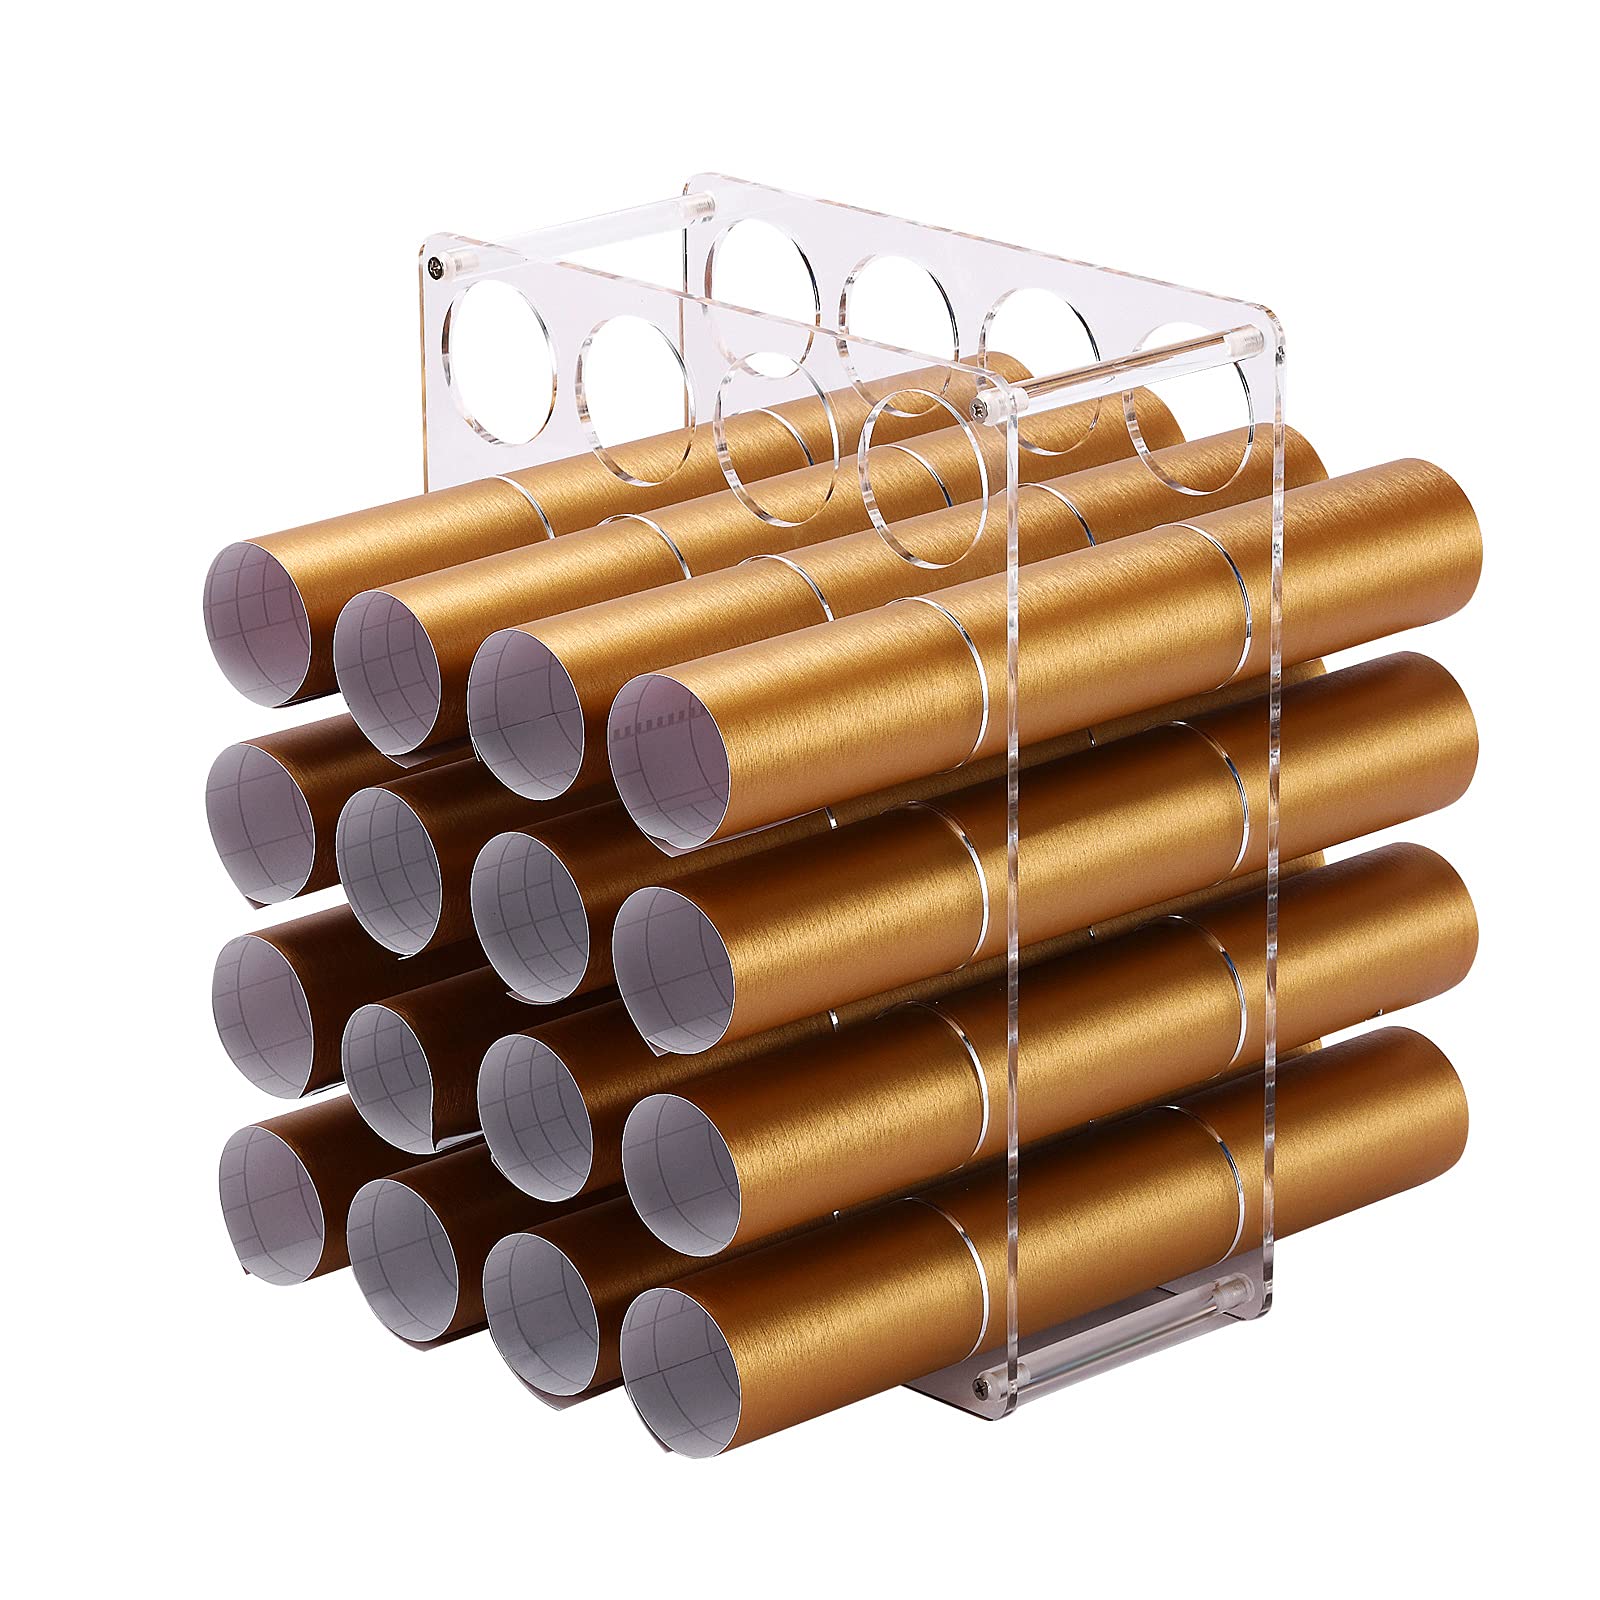  Vinyl Roll Holder with 24 Large Holes - Wide, Sturdy